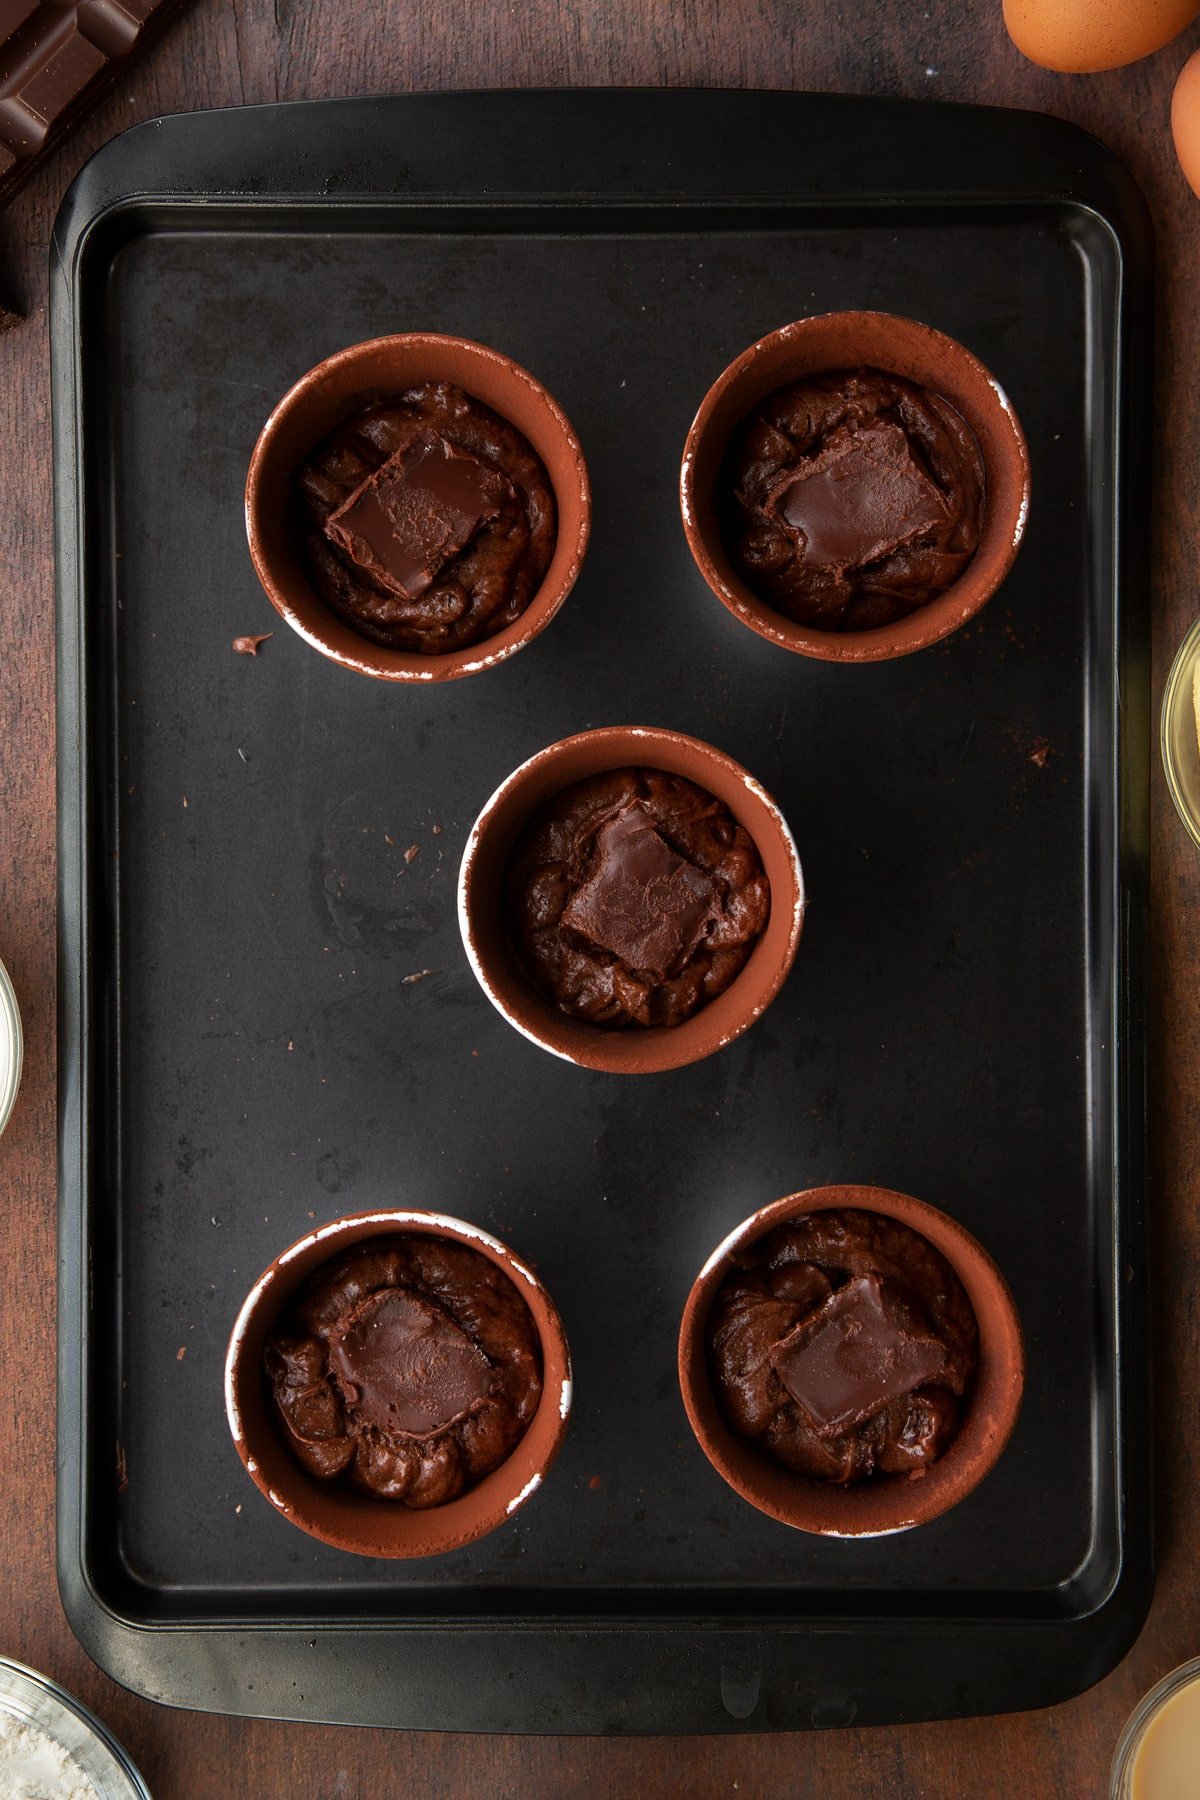 5 ceramic cake moulds filled with chocolate baileys cake mix  topped with a hot chocolate cube on a baking tray.